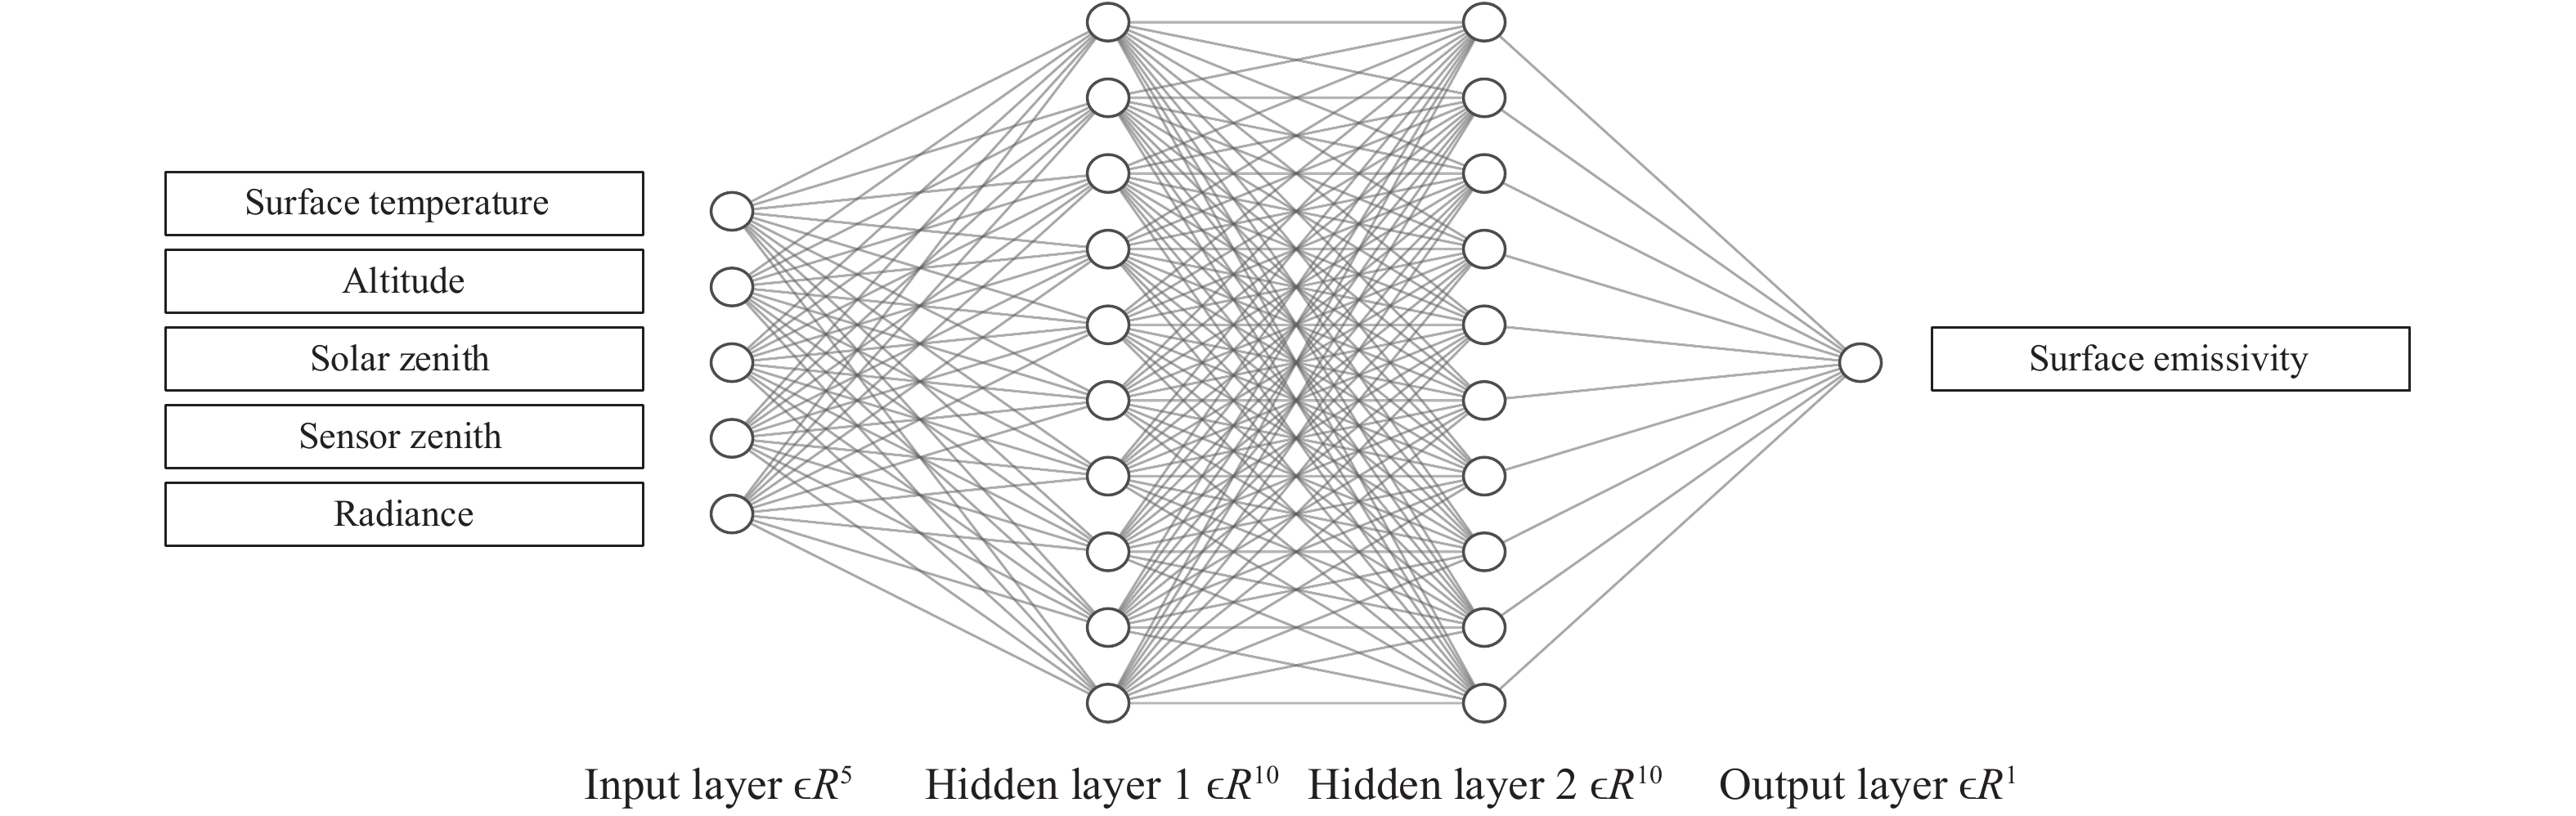 Schematic of neural networks for retrieving surface emissivity